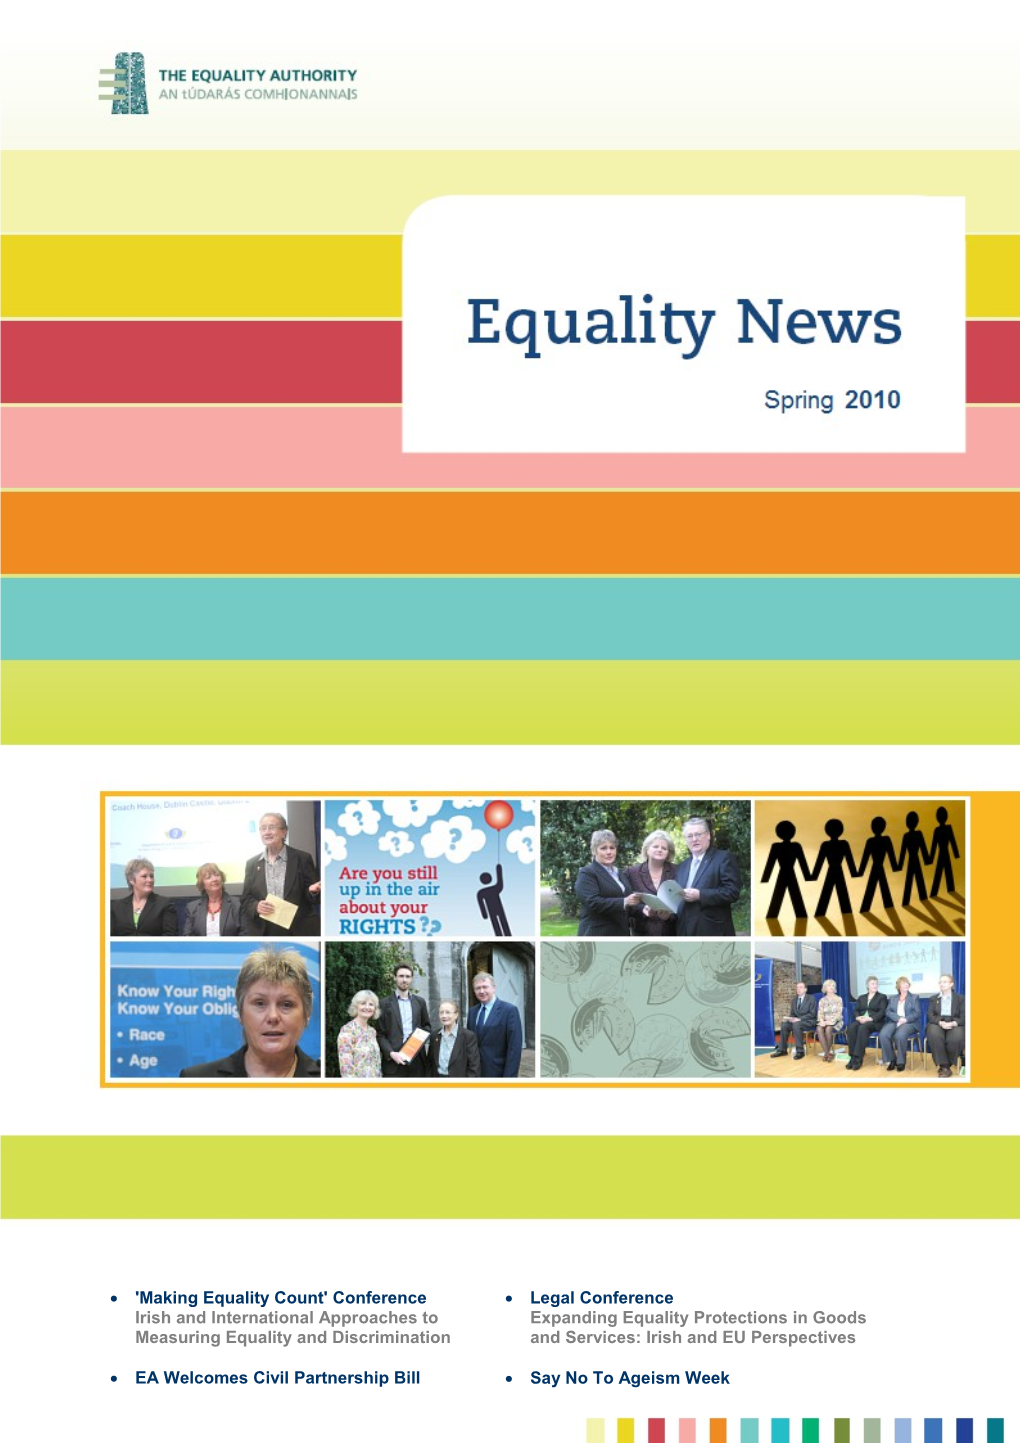 Equality Authority Welcomes Introduction of Civil Partnership Bill As Important Step Forward